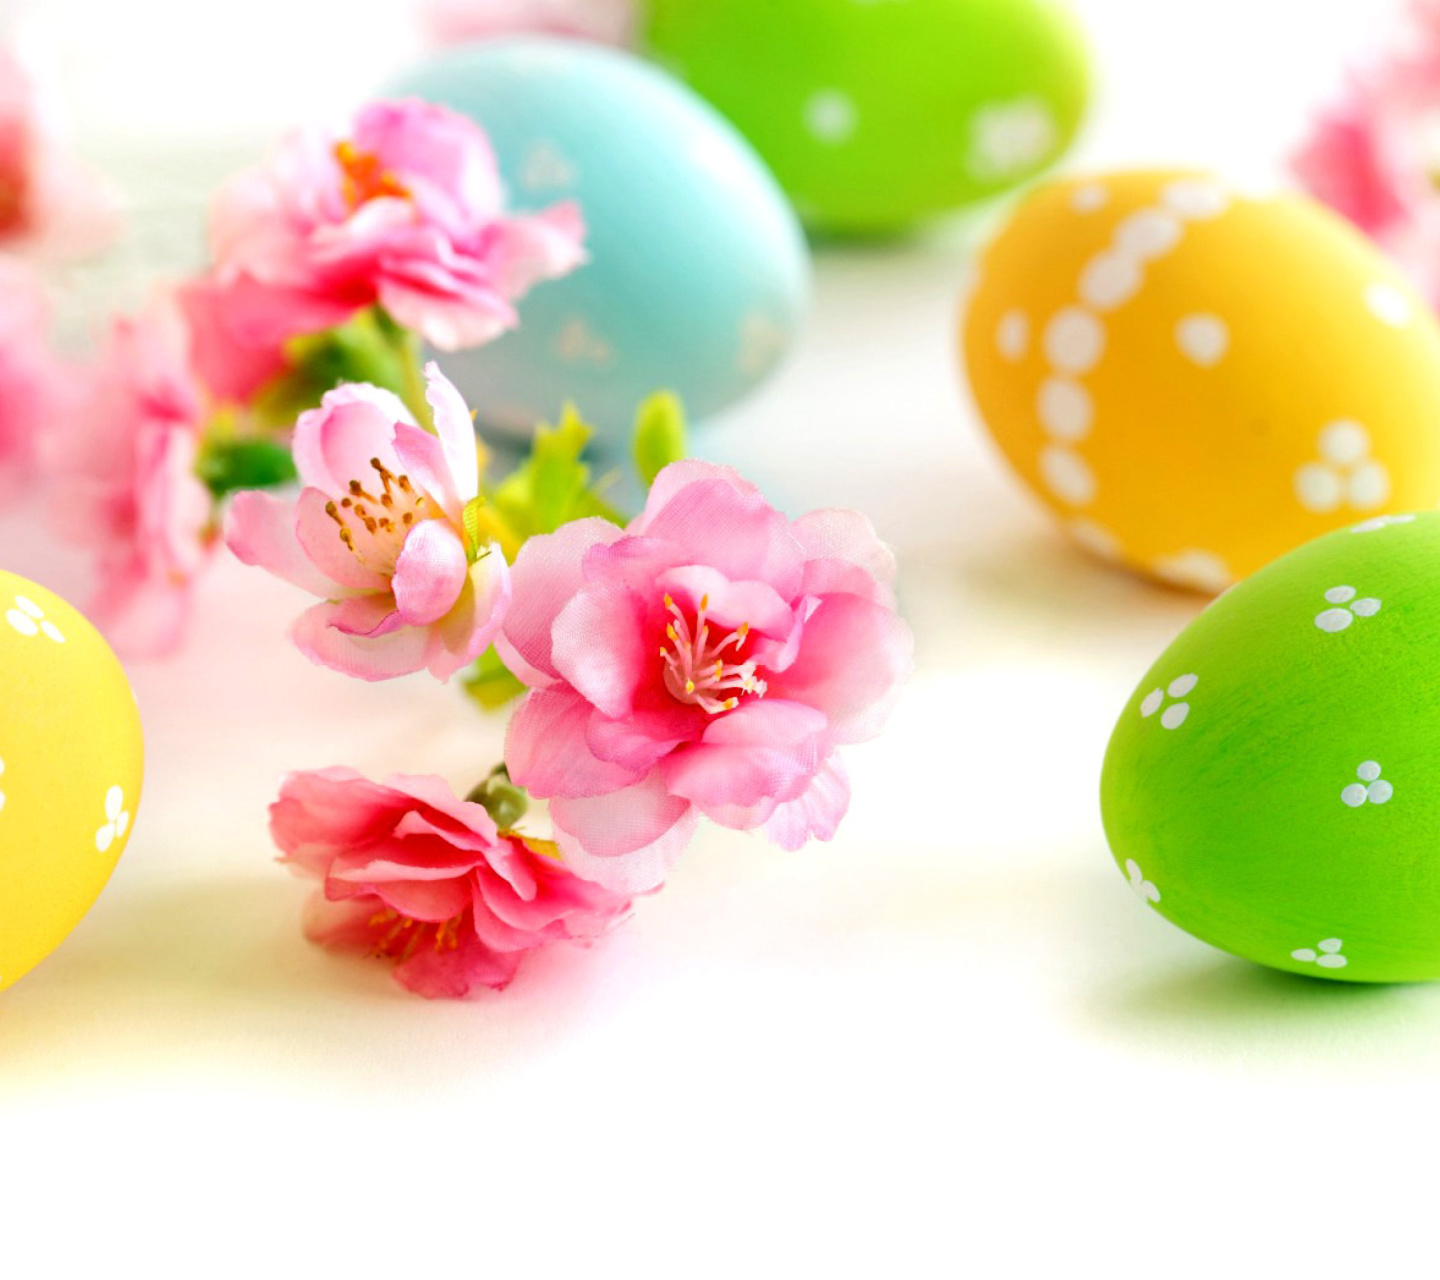 Easter Eggs and Spring Flowers wallpaper 1440x1280